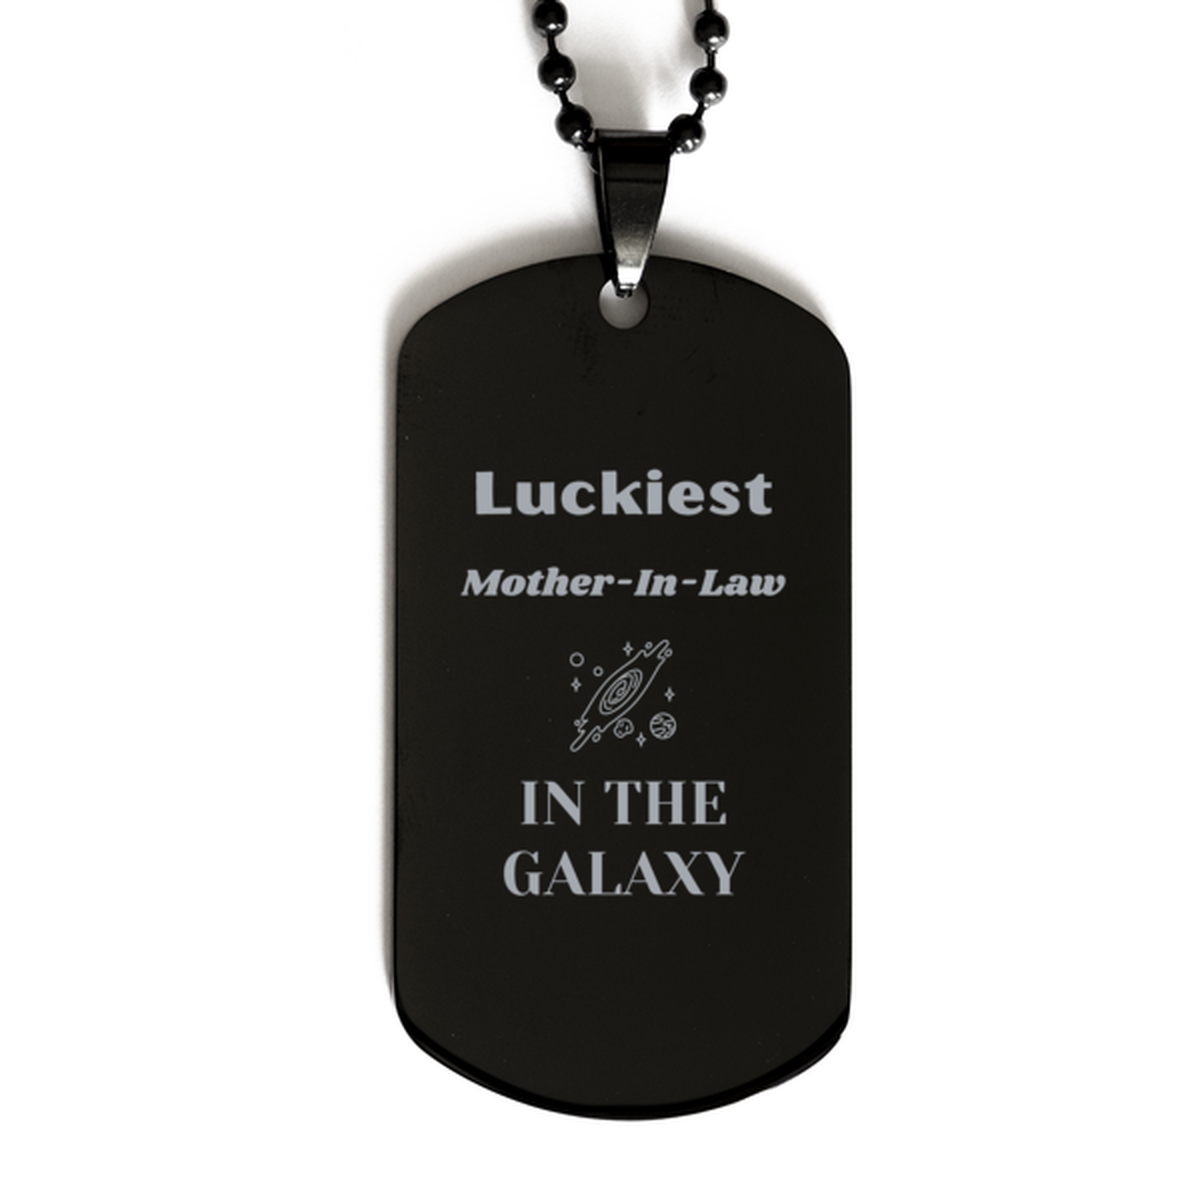 Luckiest Mother-In-Law in the Galaxy, To My Mother-In-Law Engraved Gifts, Christmas Mother-In-Law Black Dog Tag Gifts, X-mas Birthday Unique Gifts For Mother-In-Law Men Women